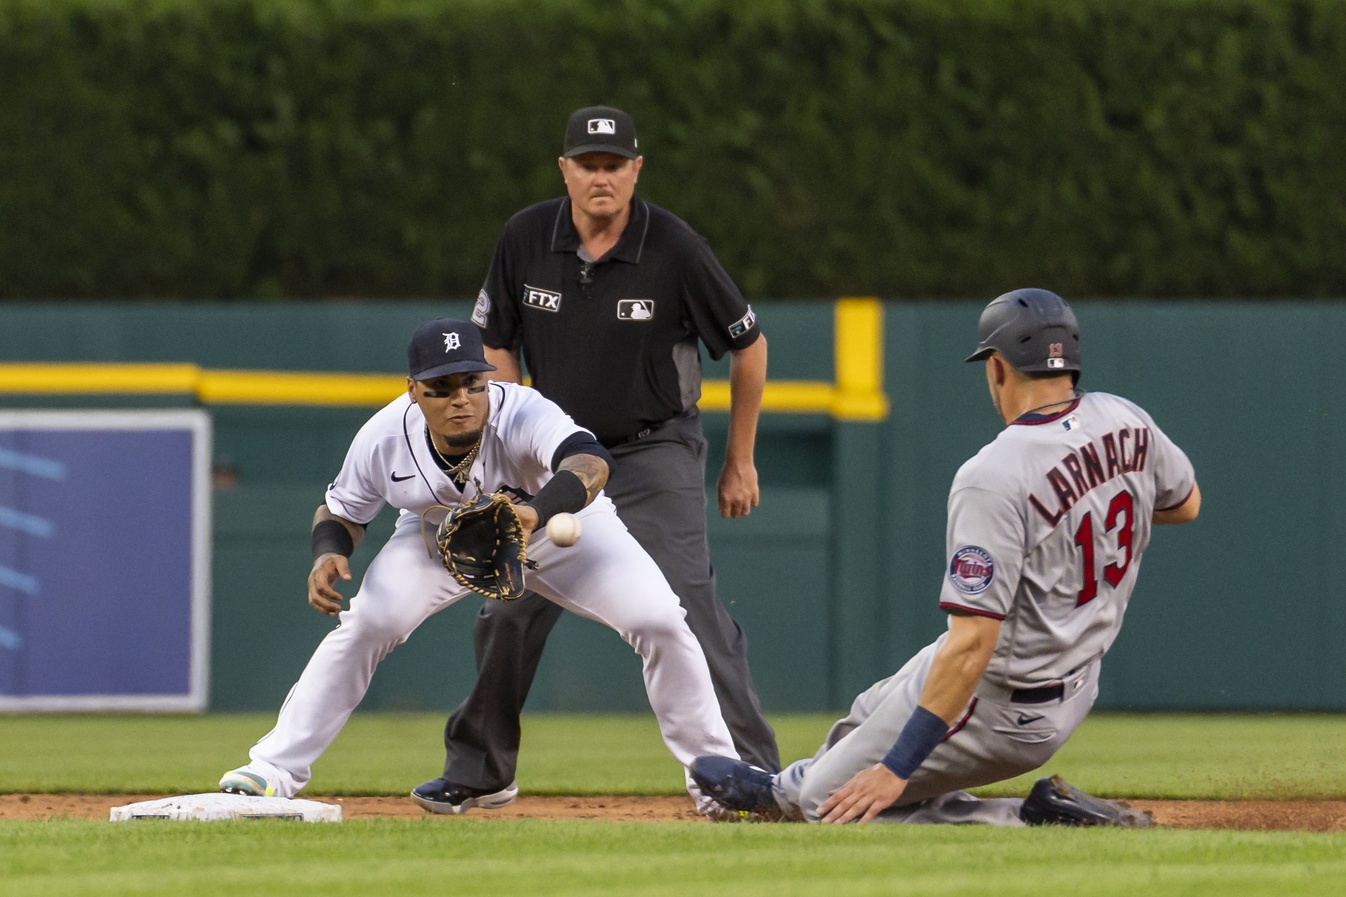 4-0 loss sees Twins split doubleheader with Tigers